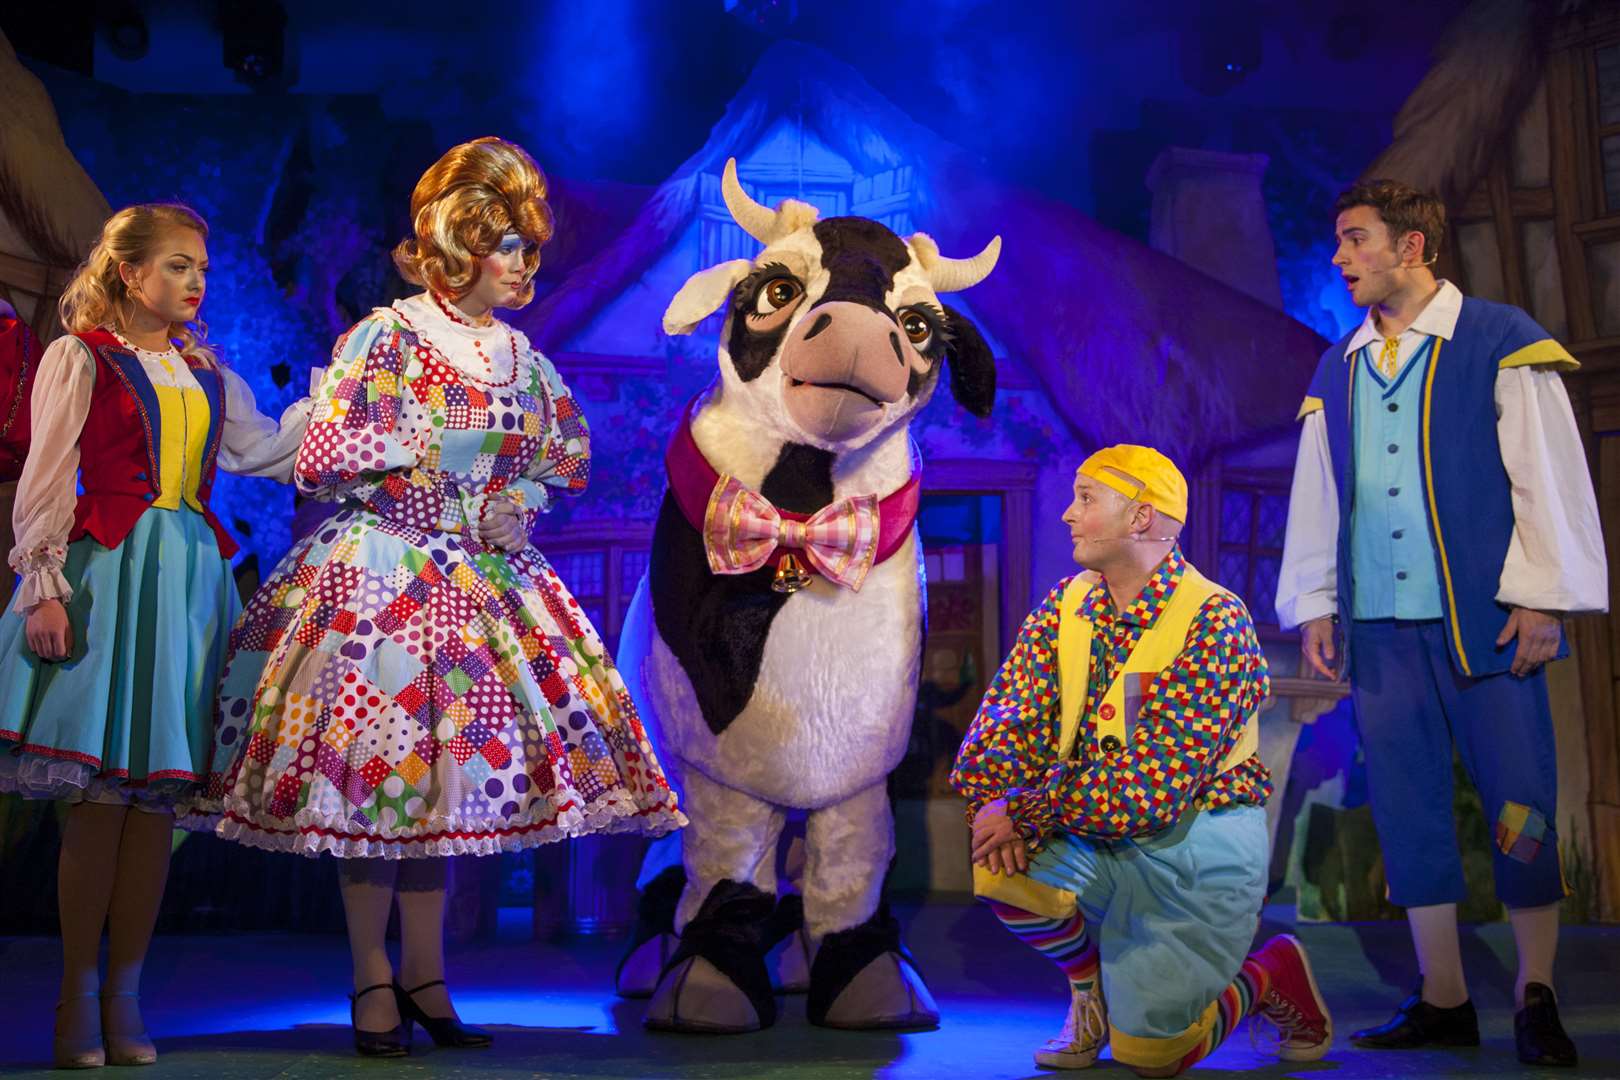 From left, Lucy Reed as Princess Apricot, Robert Pearce as Dame Trott, Daisy the cow, Ant Payne as Silly Billy and Rory Phelan as Jack